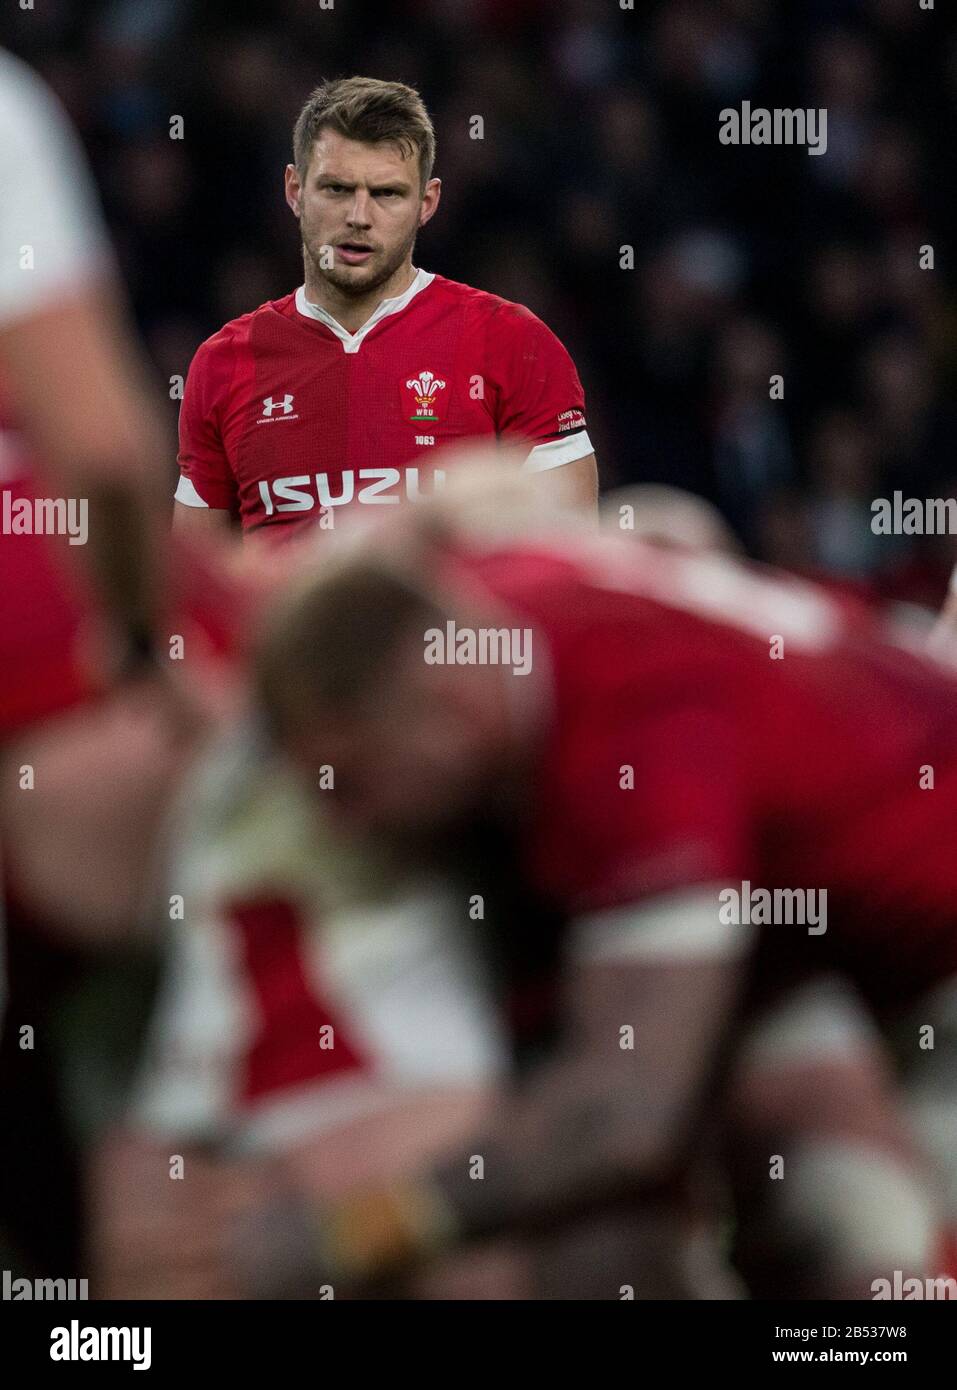 Londres, Royaume-Uni. 7 mars 2020. Rugby Union Guinness Six Nations Championship, Angleterre Contre Pays De Galles, Twickenham, 2020, 07/03/2020 Dan Biggar Of Wales Credit: Paul Harding/Alay Live News Banque D'Images